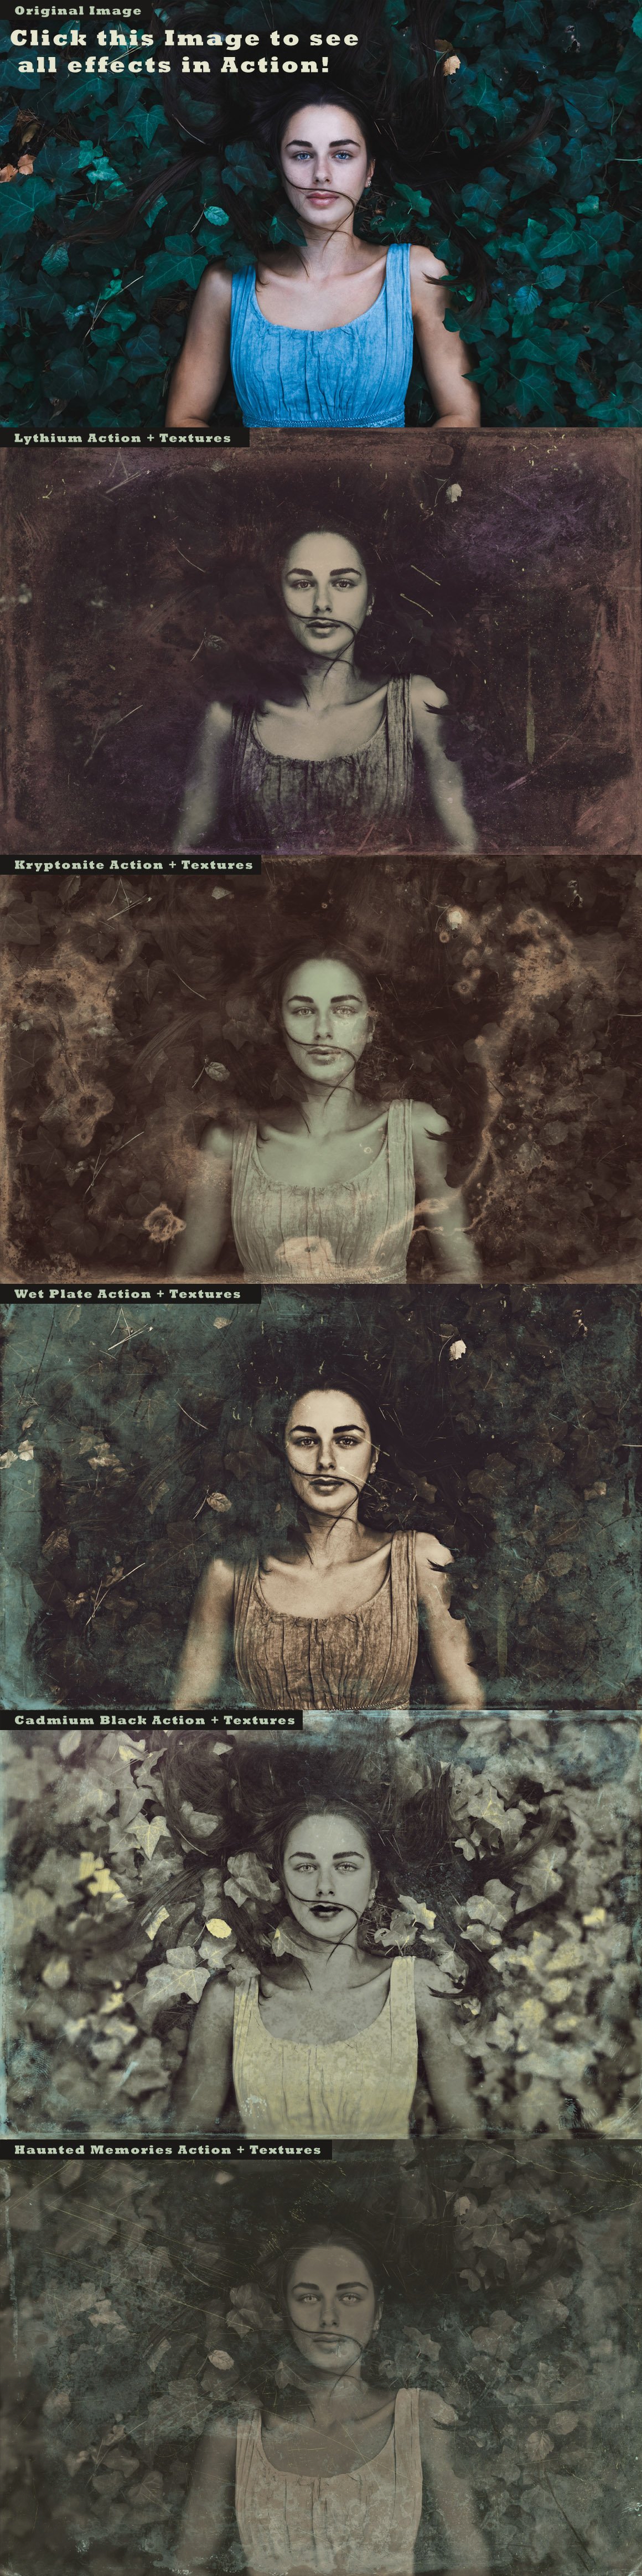 20 Daguerreotype Textures&Actions v2preview image.